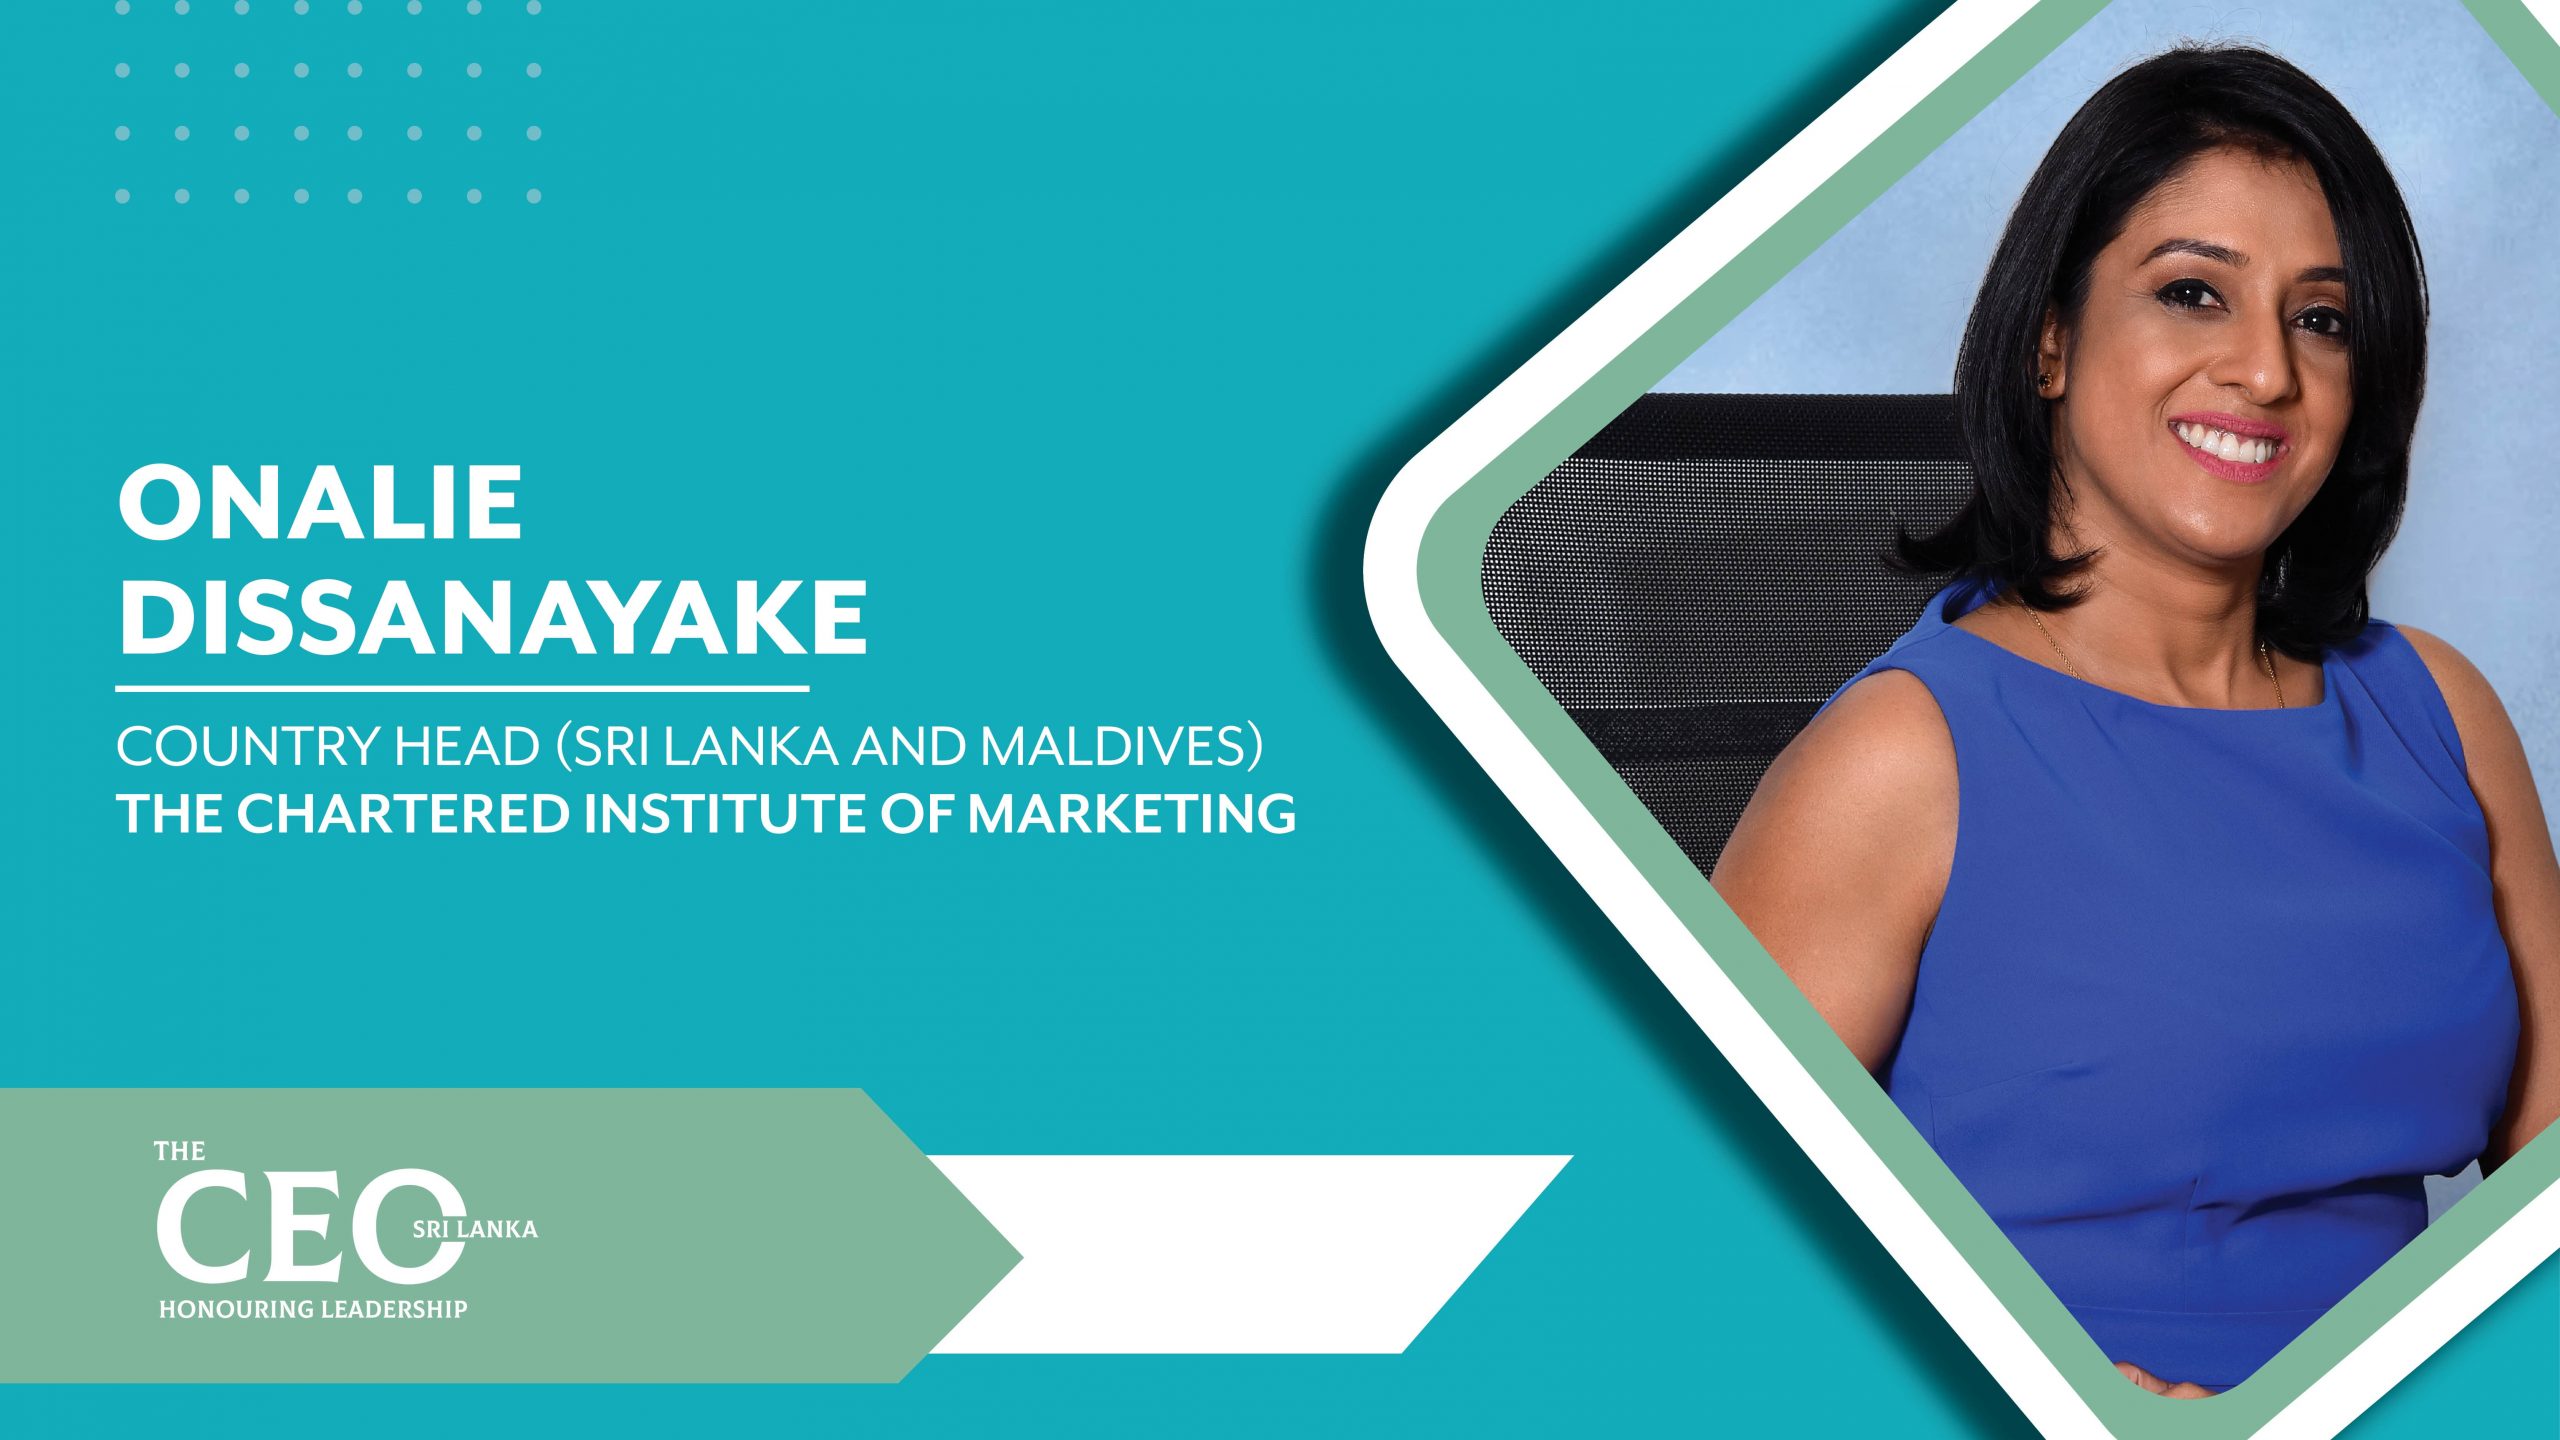 With Gratifying Consistency, a Leap of Glory – the Country Head (Sri Lanka and The Maldives) for the Chartered Institute of Marketing, Onalie Dissanayake